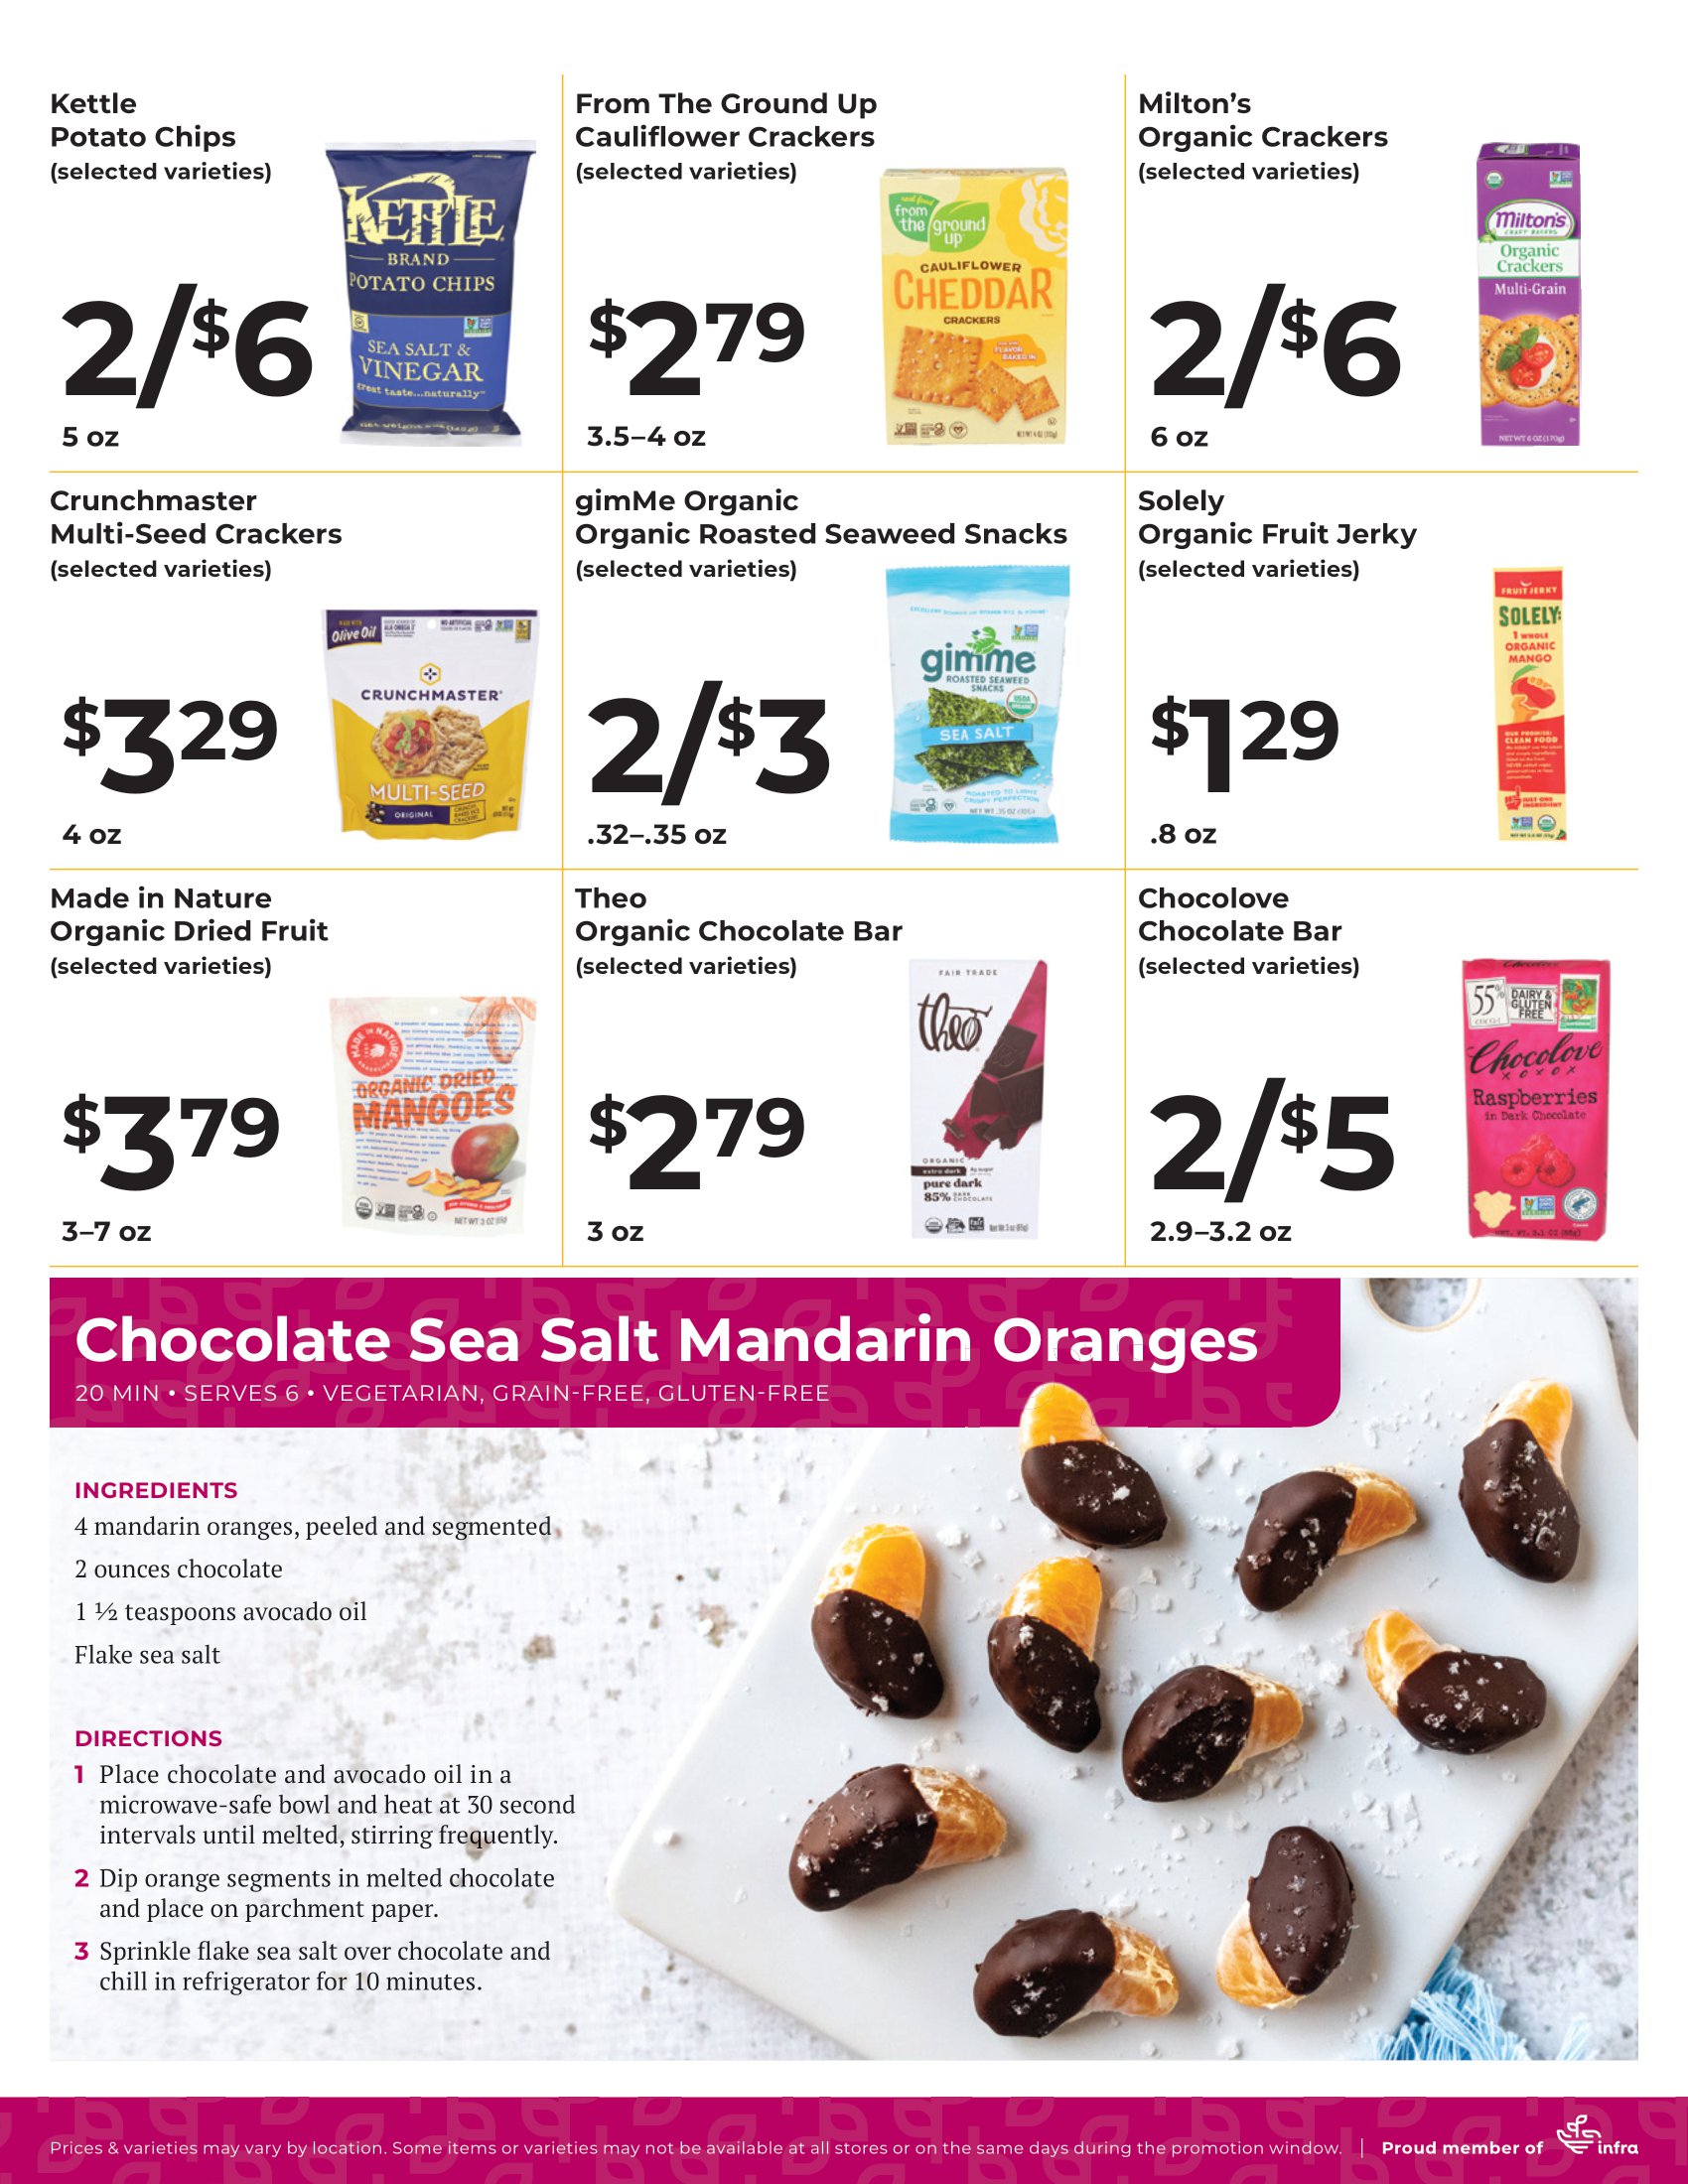 Ramona Family Naturals - monthly specials page 4